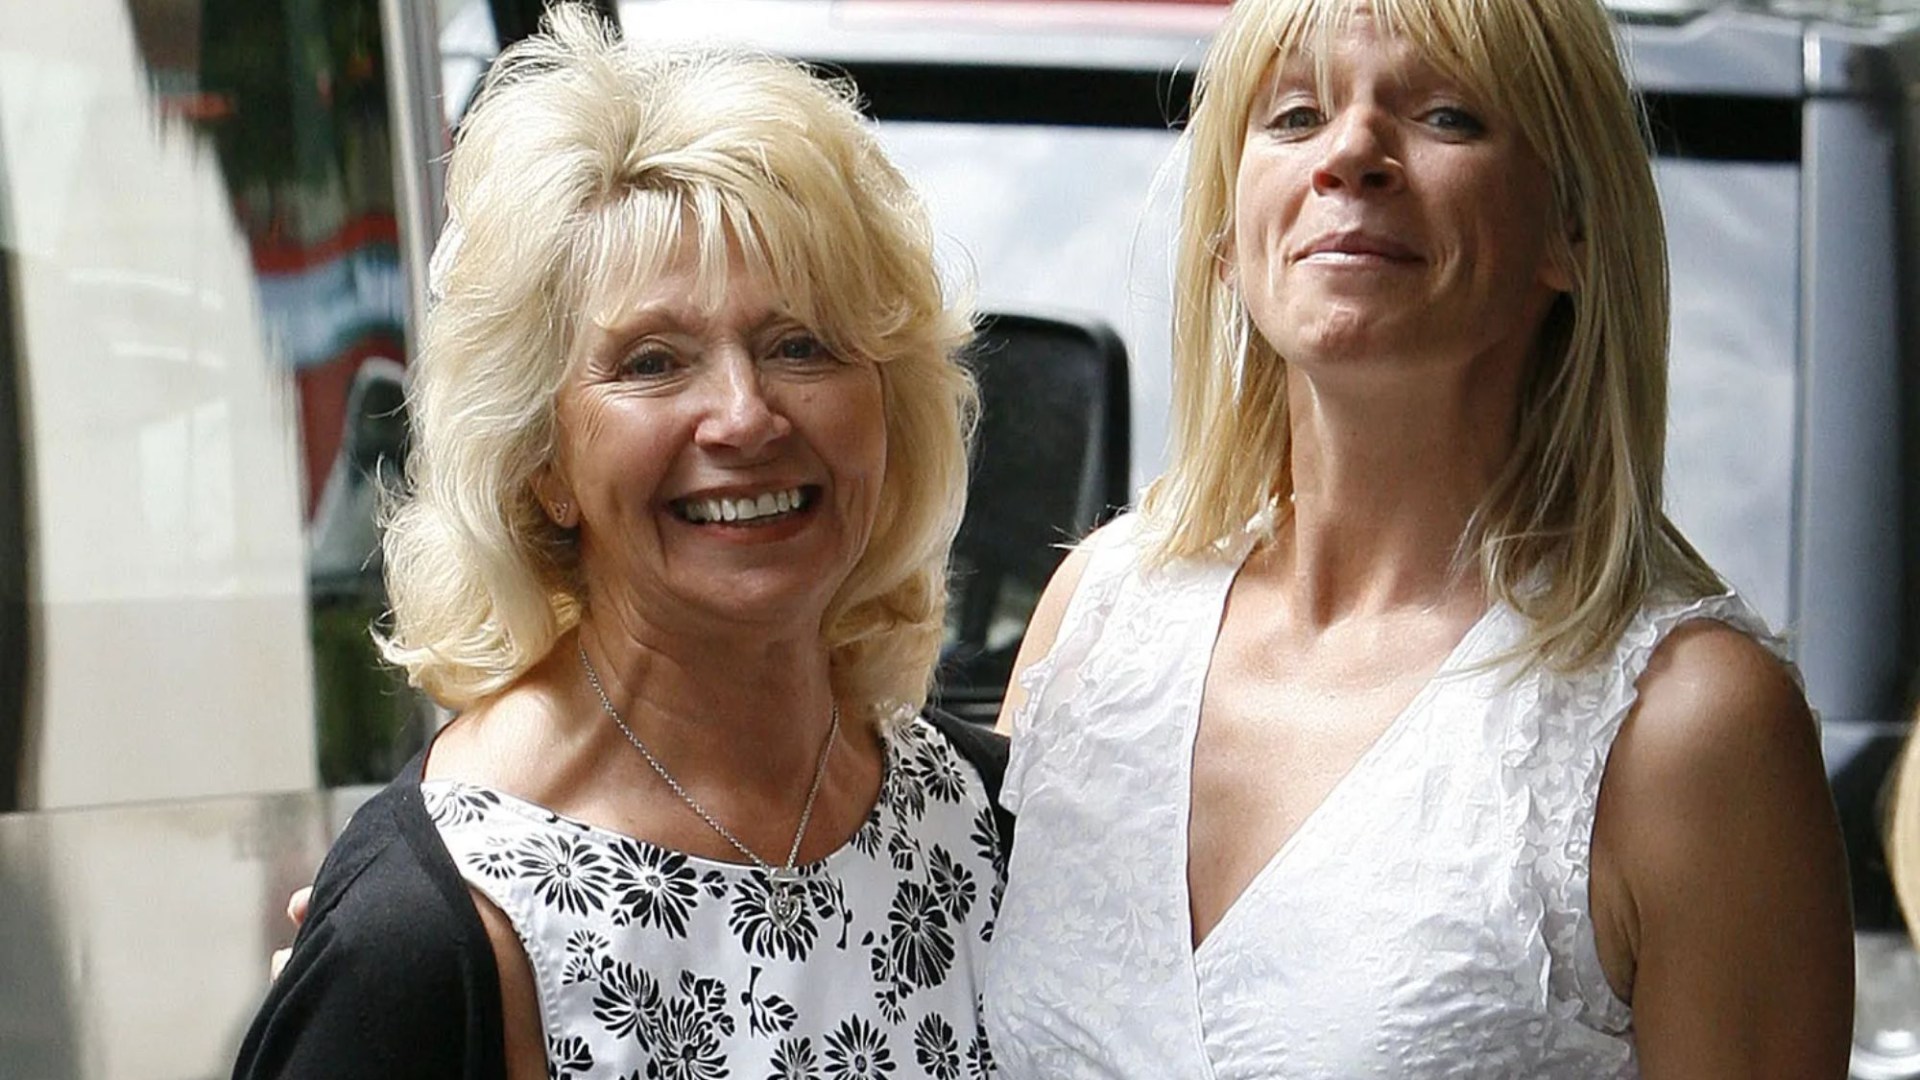 “Zoe Ball honors late mum Julia in a touching tribute at her funeral – a perfect day remembered” #ZoeBall #tribute #funeral #perfectday #Julia #celebration